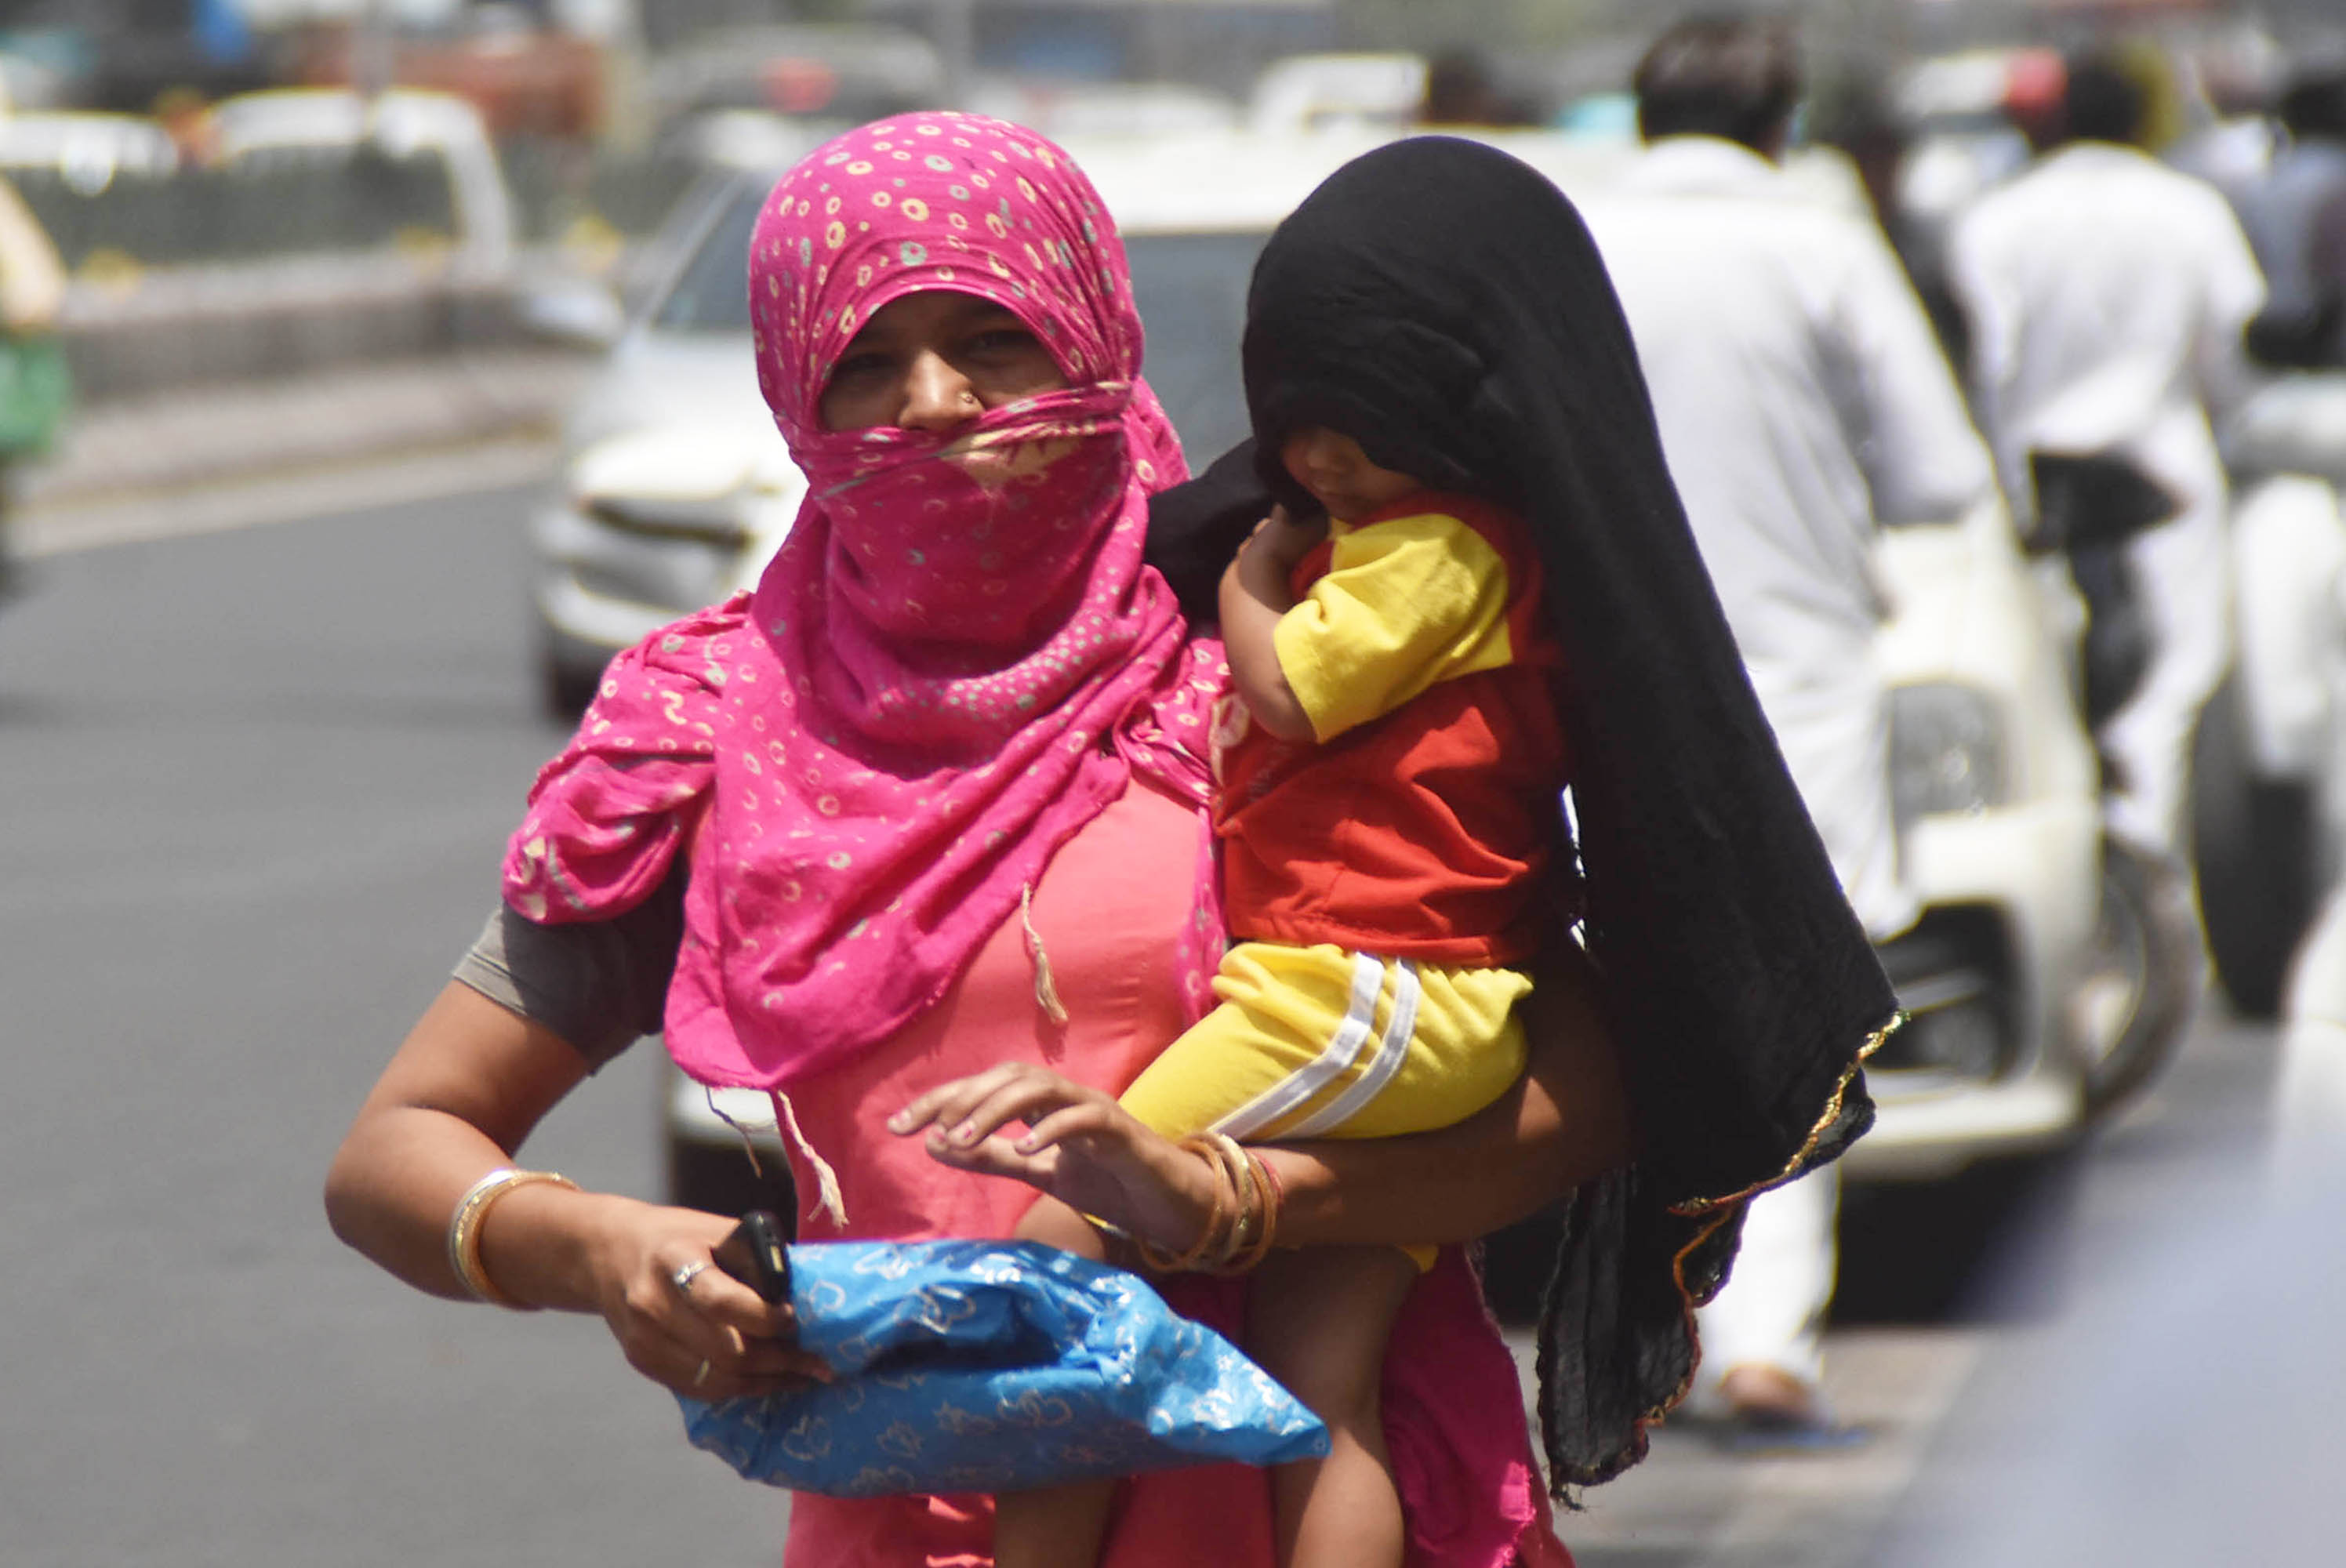 Blistering weather conditions prevail across Haryana, Punjab; Gurugram sizzles at 48.1 degrees Celsius